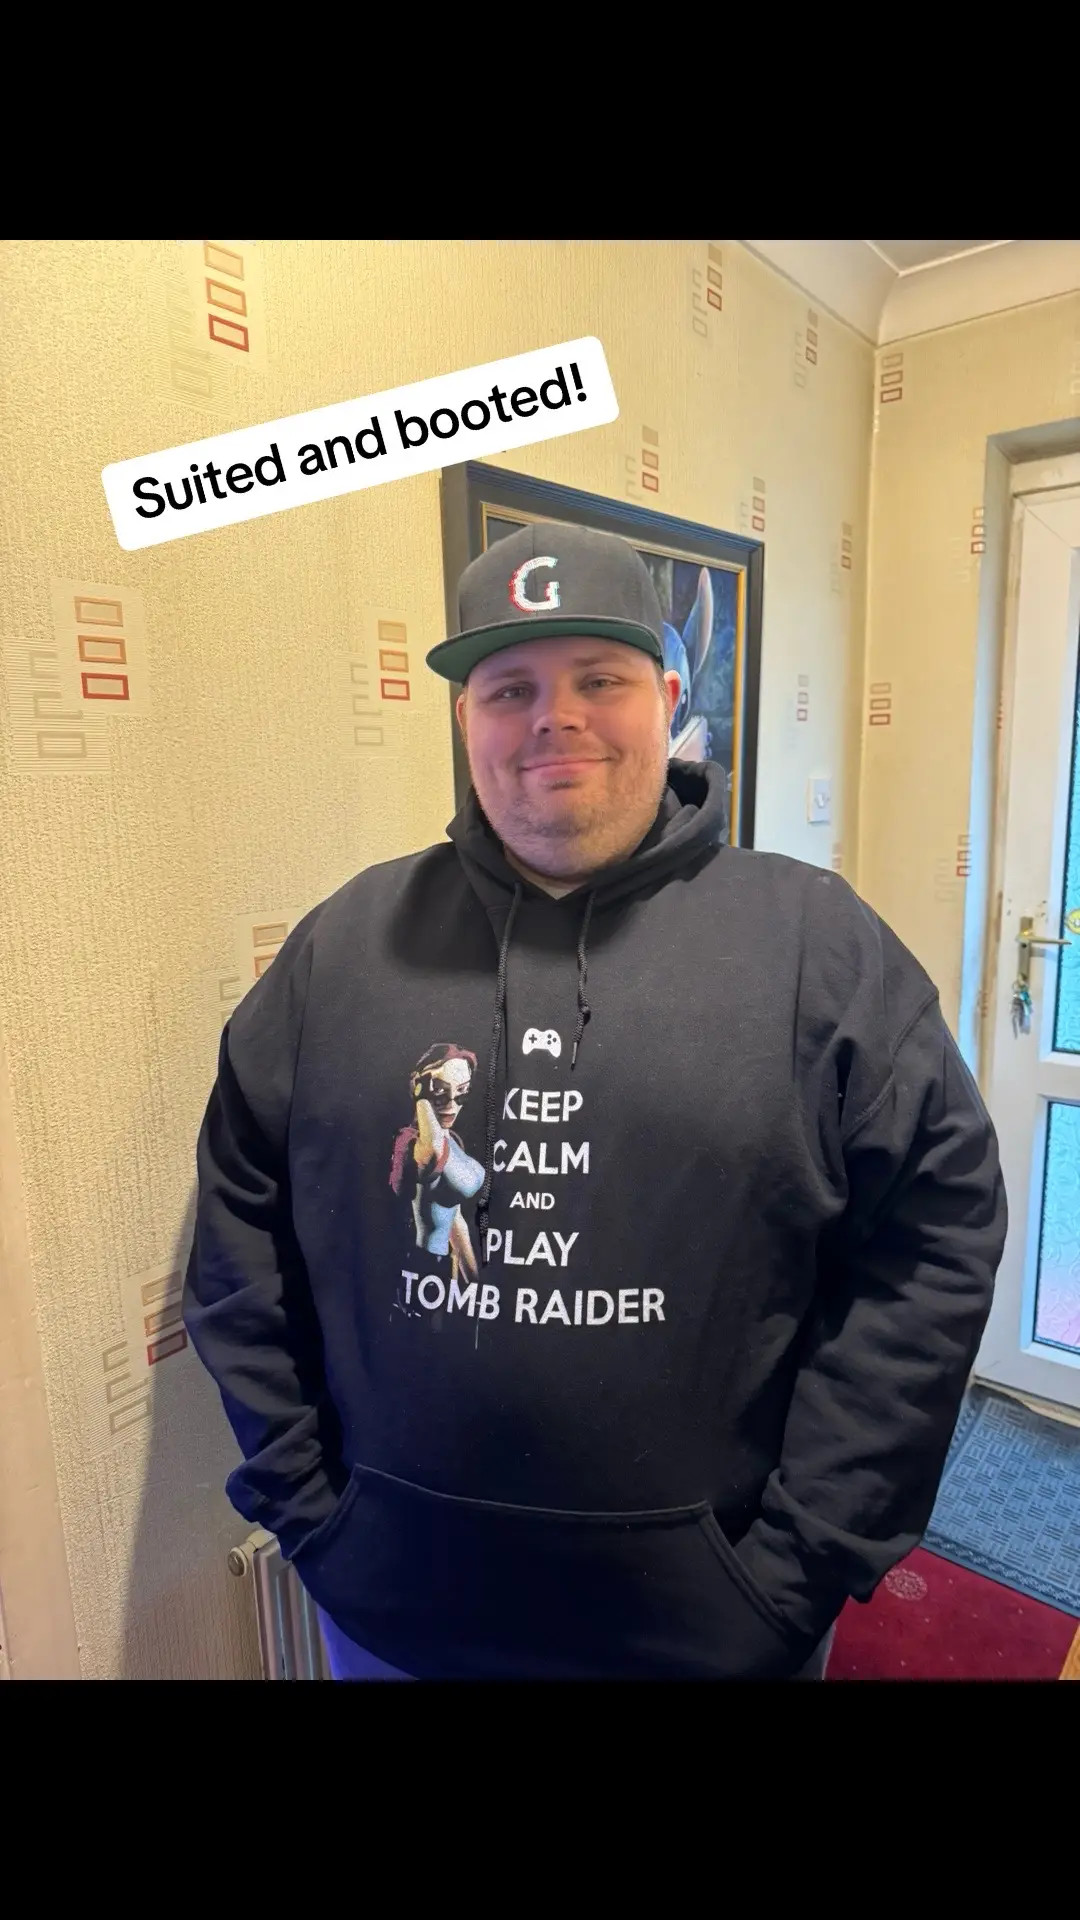 Suited snd booted with my Keep Calm #tombraider hoodie and my new snapback, both amazing quality from @GlitchElite ❤️🔥🔥 #tombraiderremastered #tr #laracroft #keepcalm #ad #glitchelite 